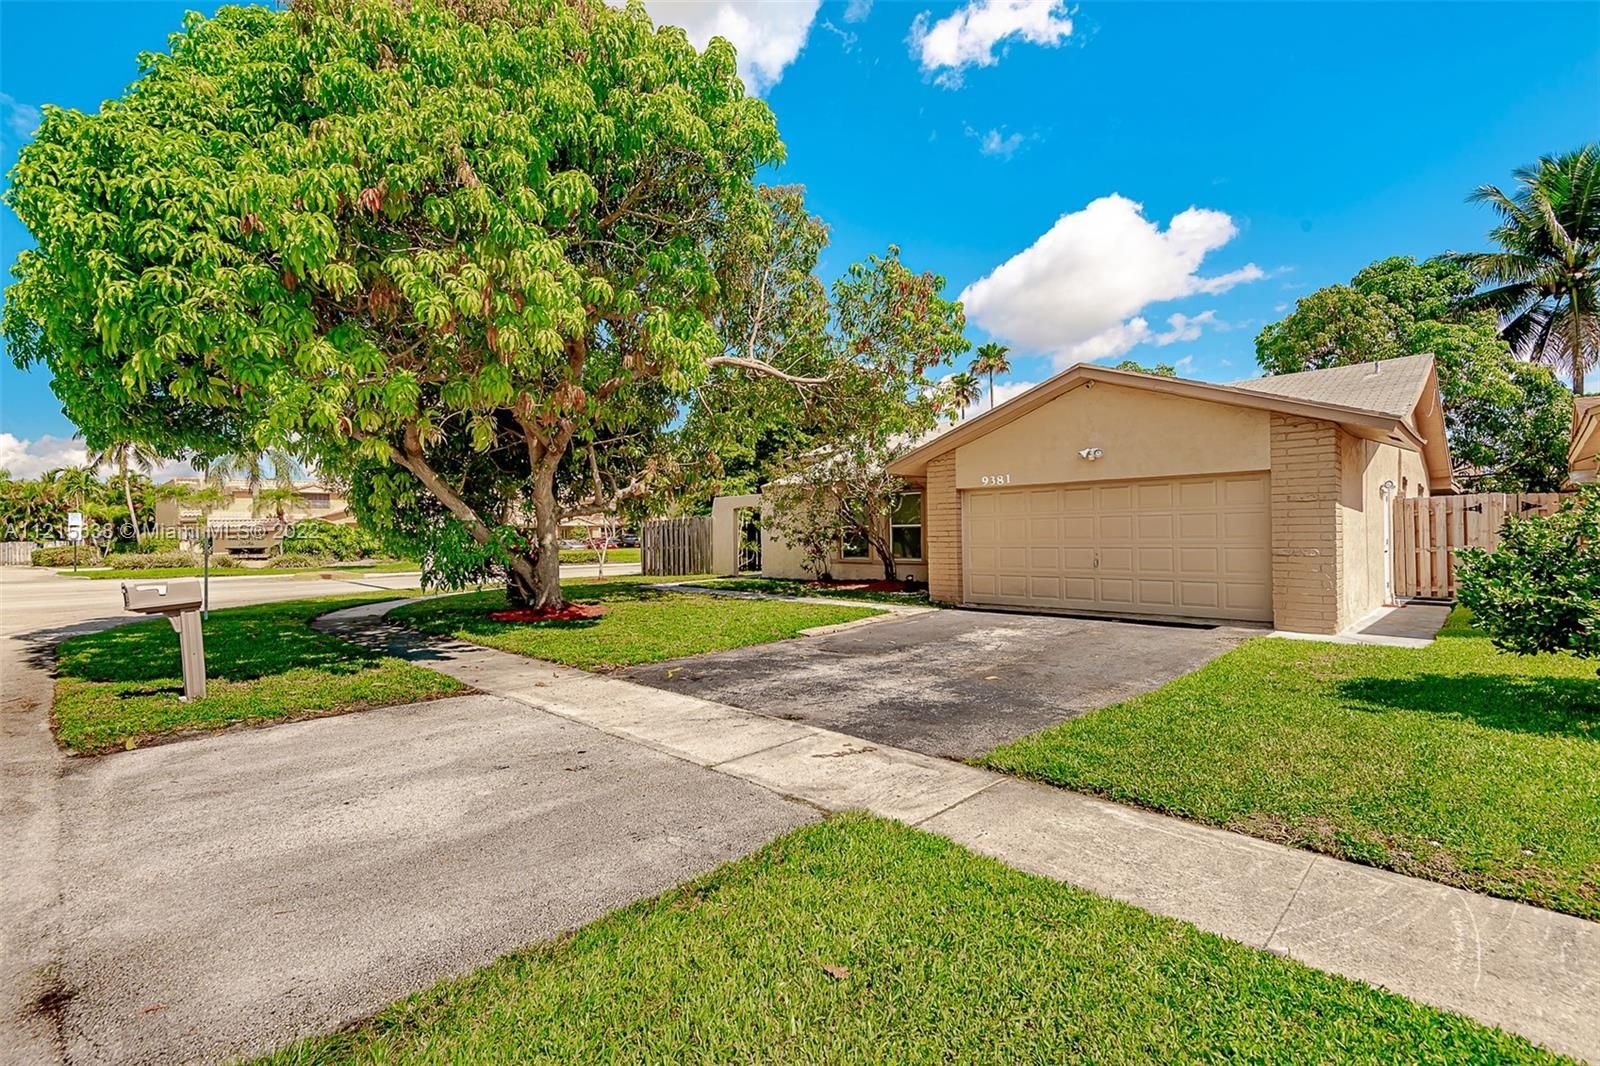 Real estate property located at 9381 39th Ct, Broward County, Sunrise, FL